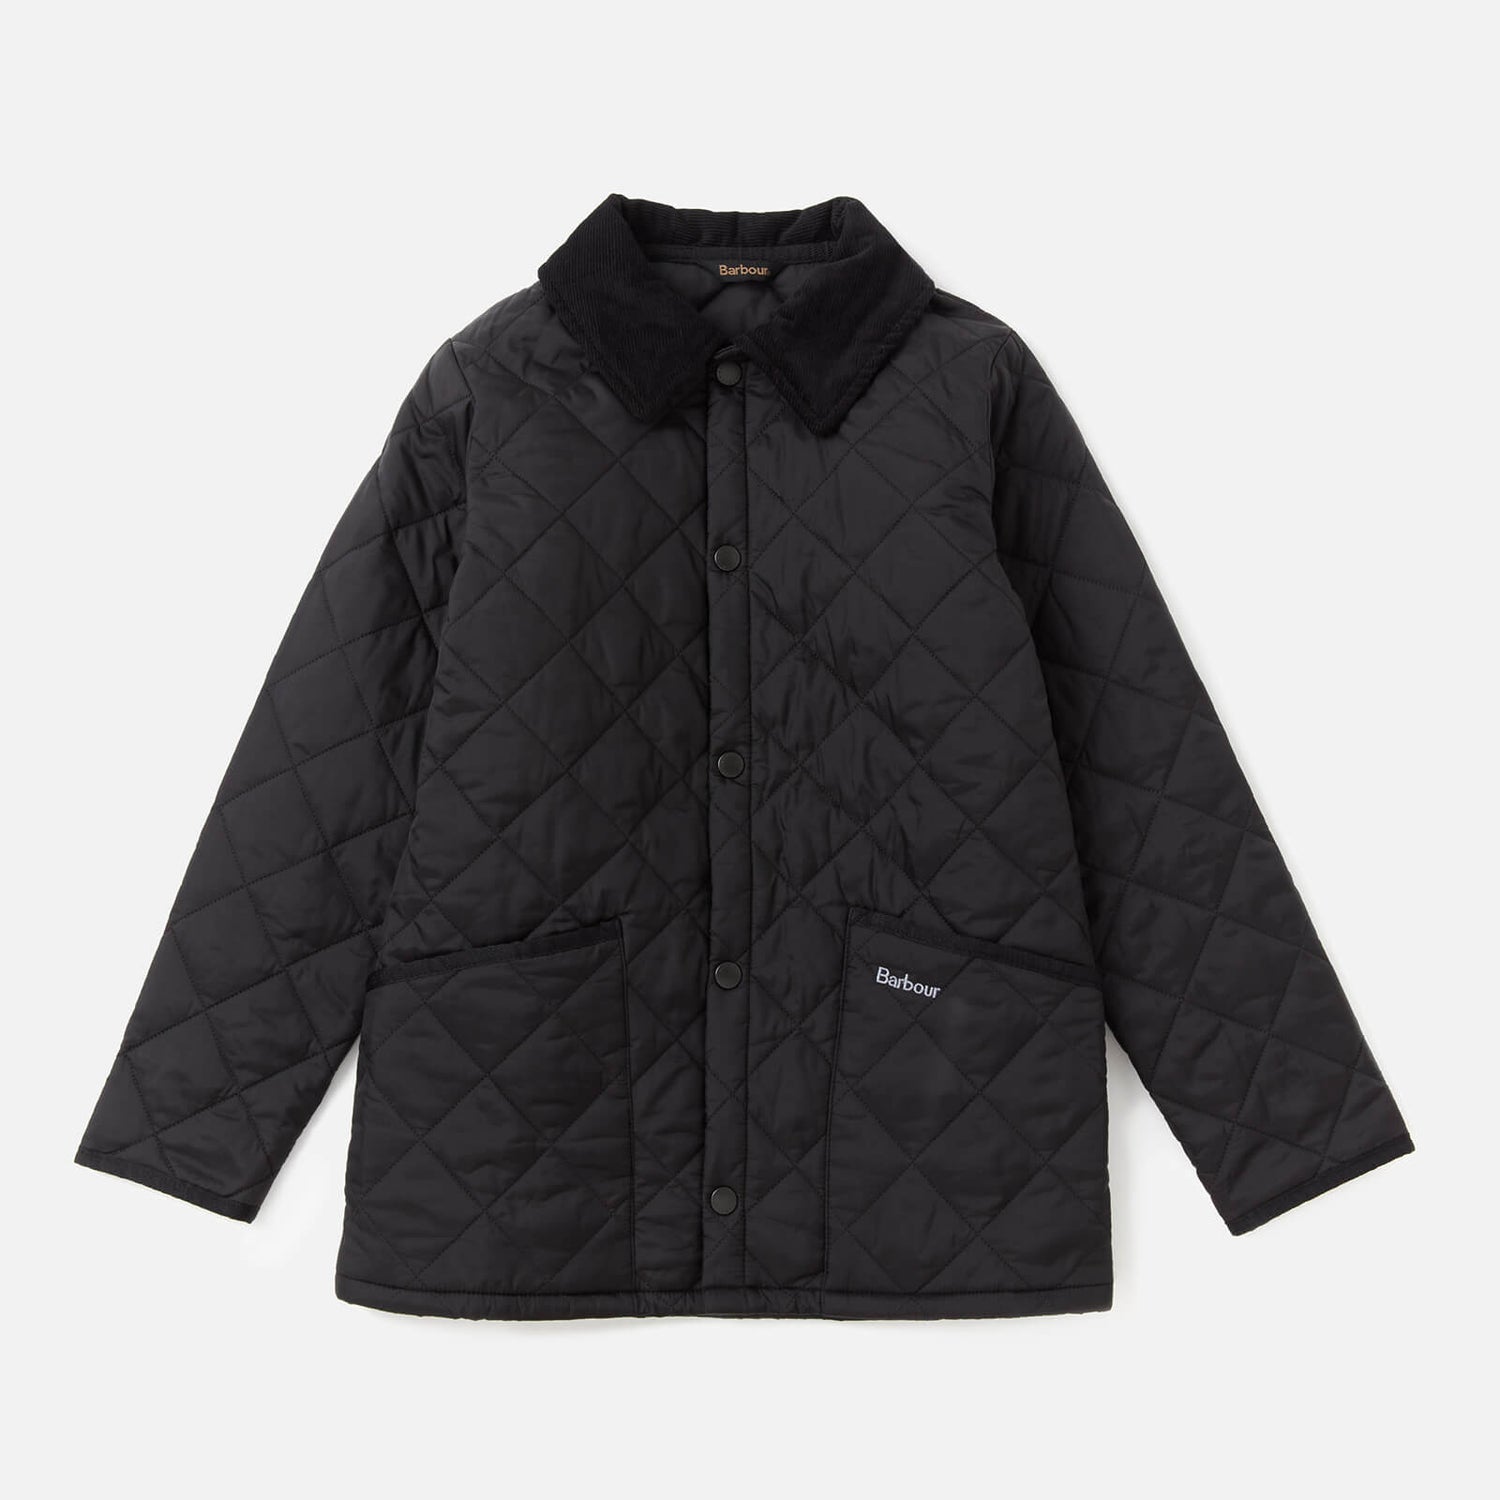 Barbour Boys Liddesdale Quilted Jacket - Black - M (8-9 Years)